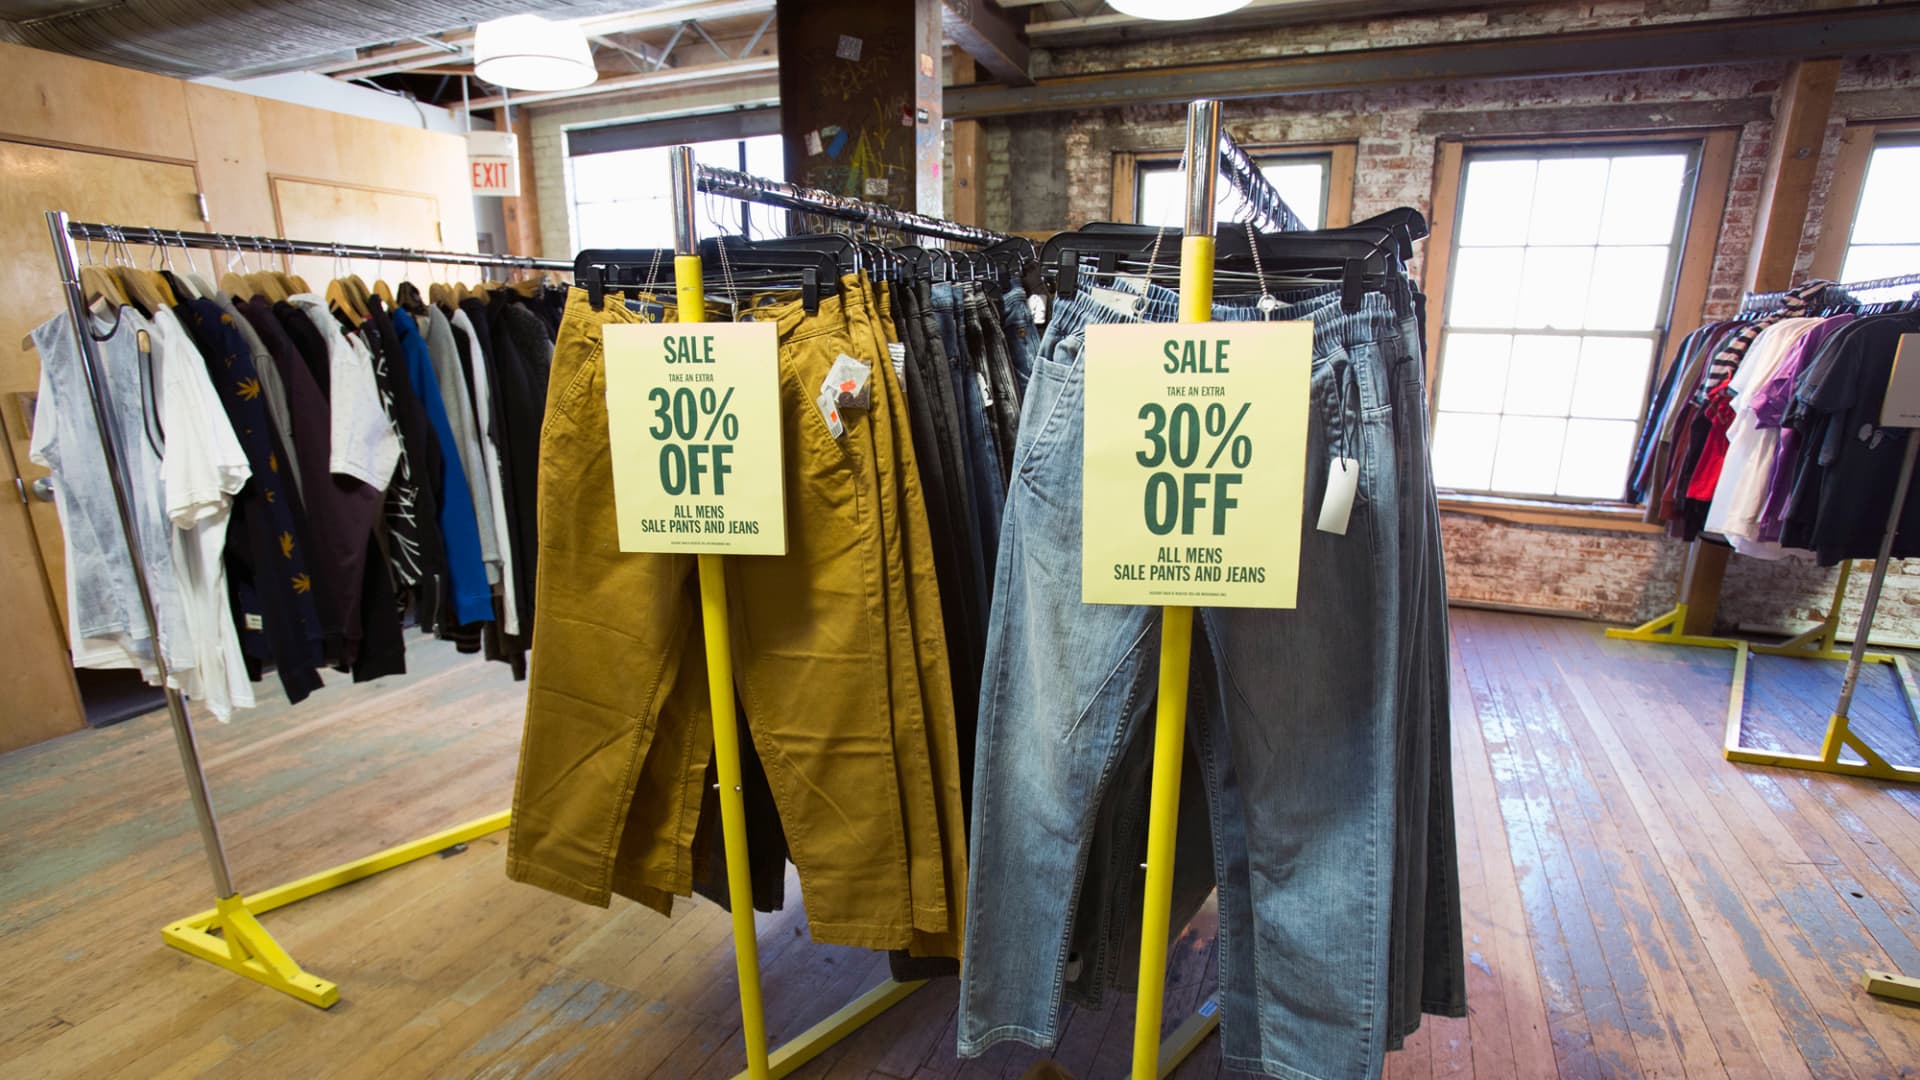 Urban Outfitters Gets Too Lean on Inventory